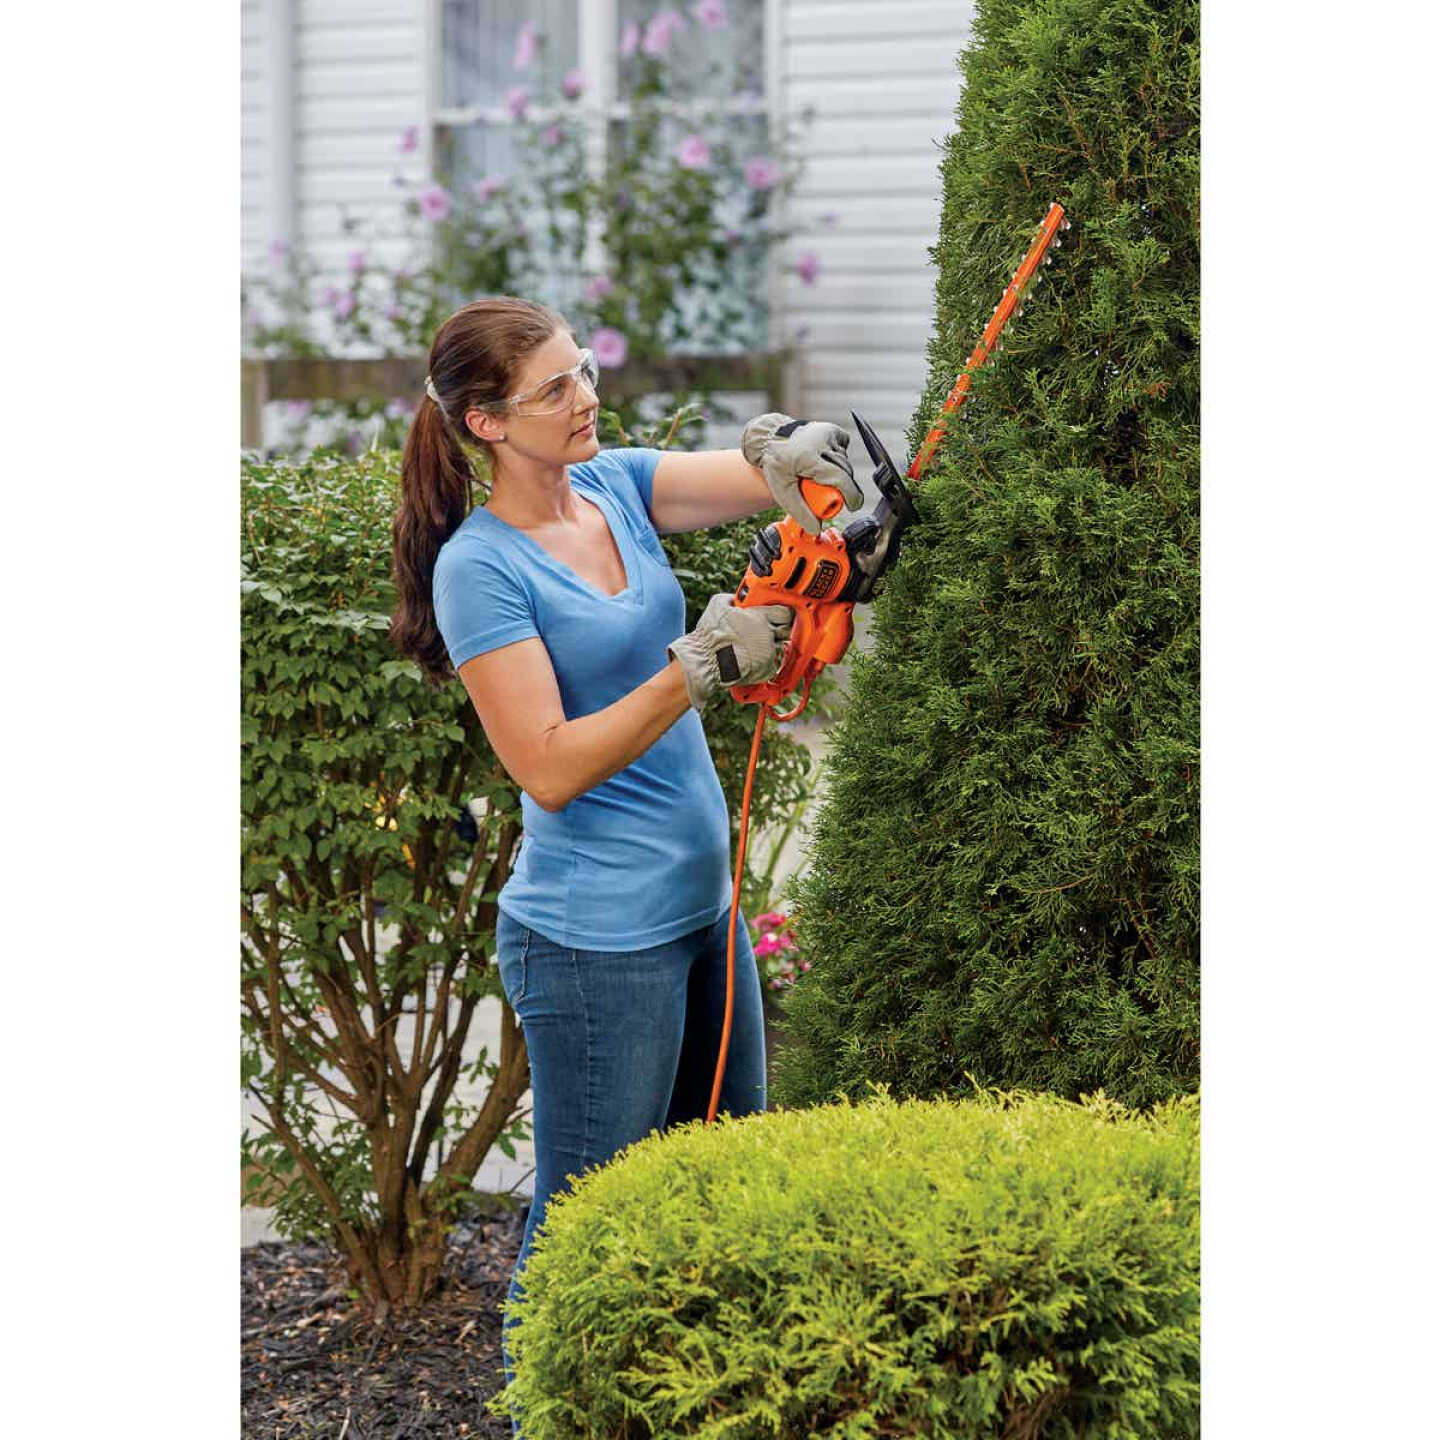 16 In. Electric Hedge Trimmer